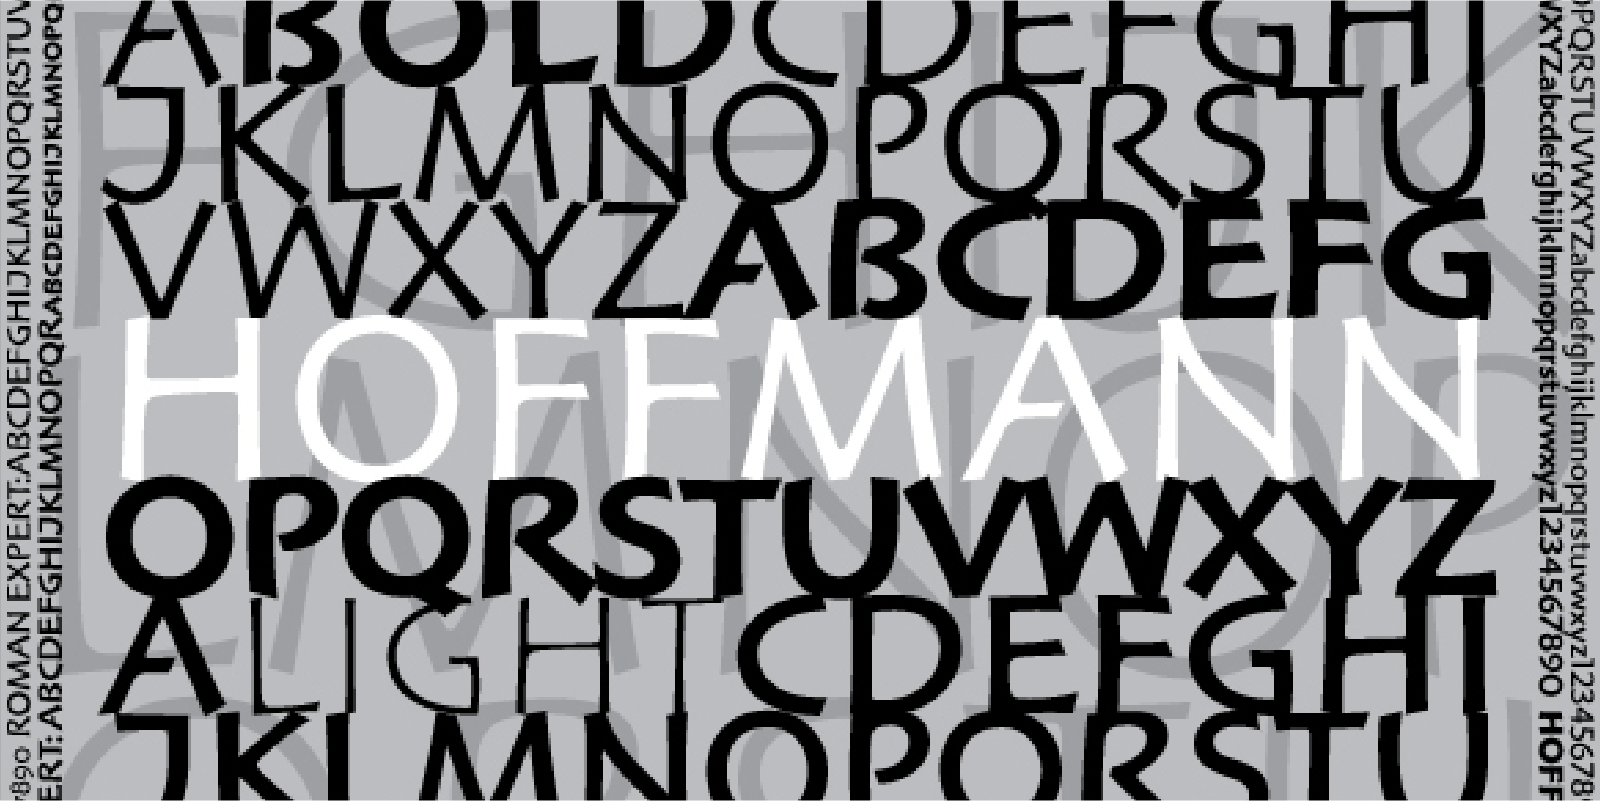 Card displaying Hoffmann typeface in various styles